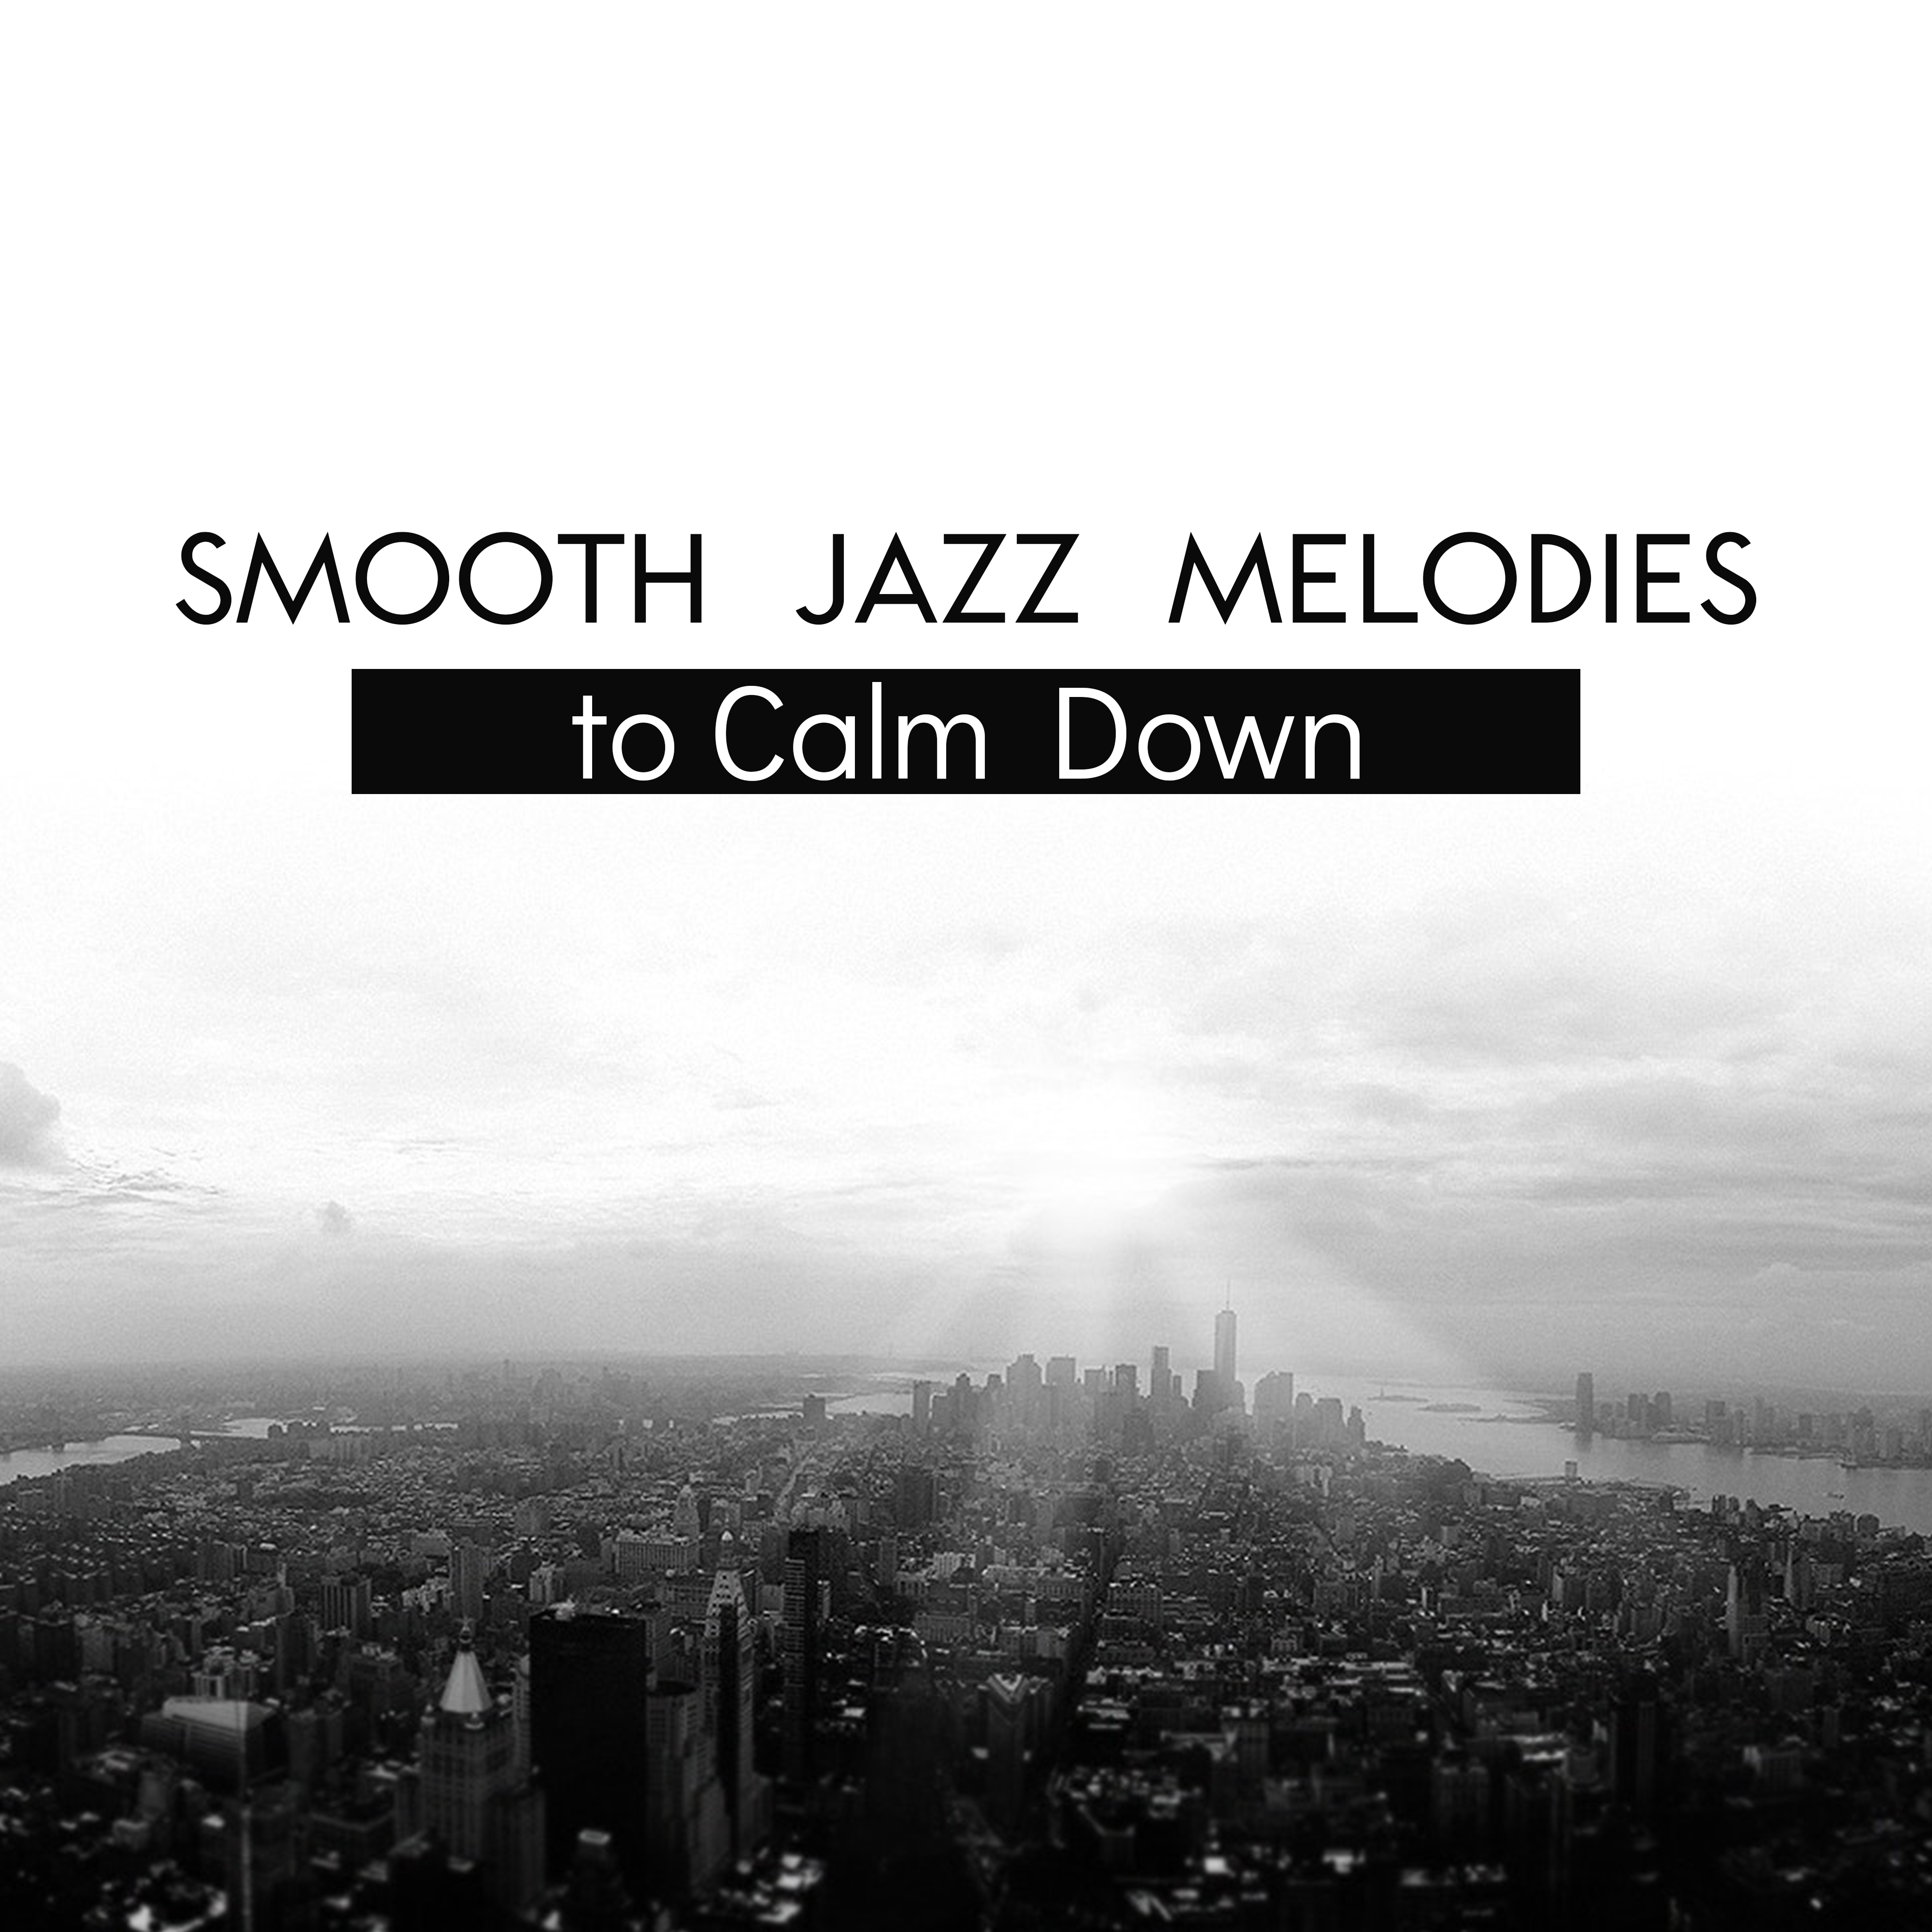 Smooth Jazz Melodies to Calm Down – Soothing Sounds to Relax, Peaceful Jazz Music, Instrumental Melodies